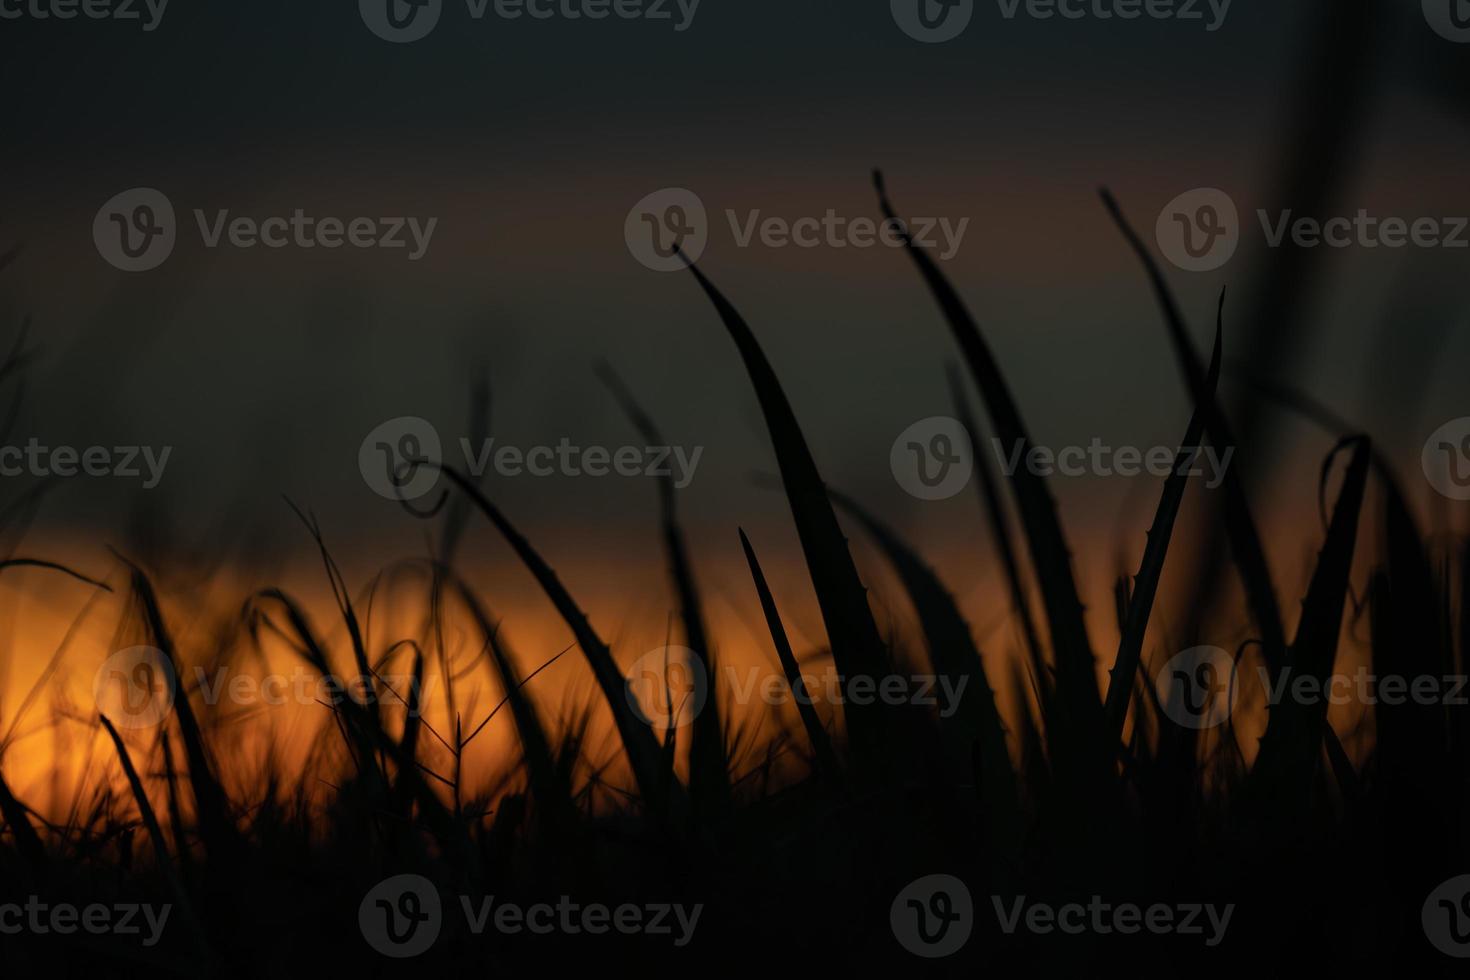 Silhouette grass flower in the orange sunset sky at the evening time for warm background. photo